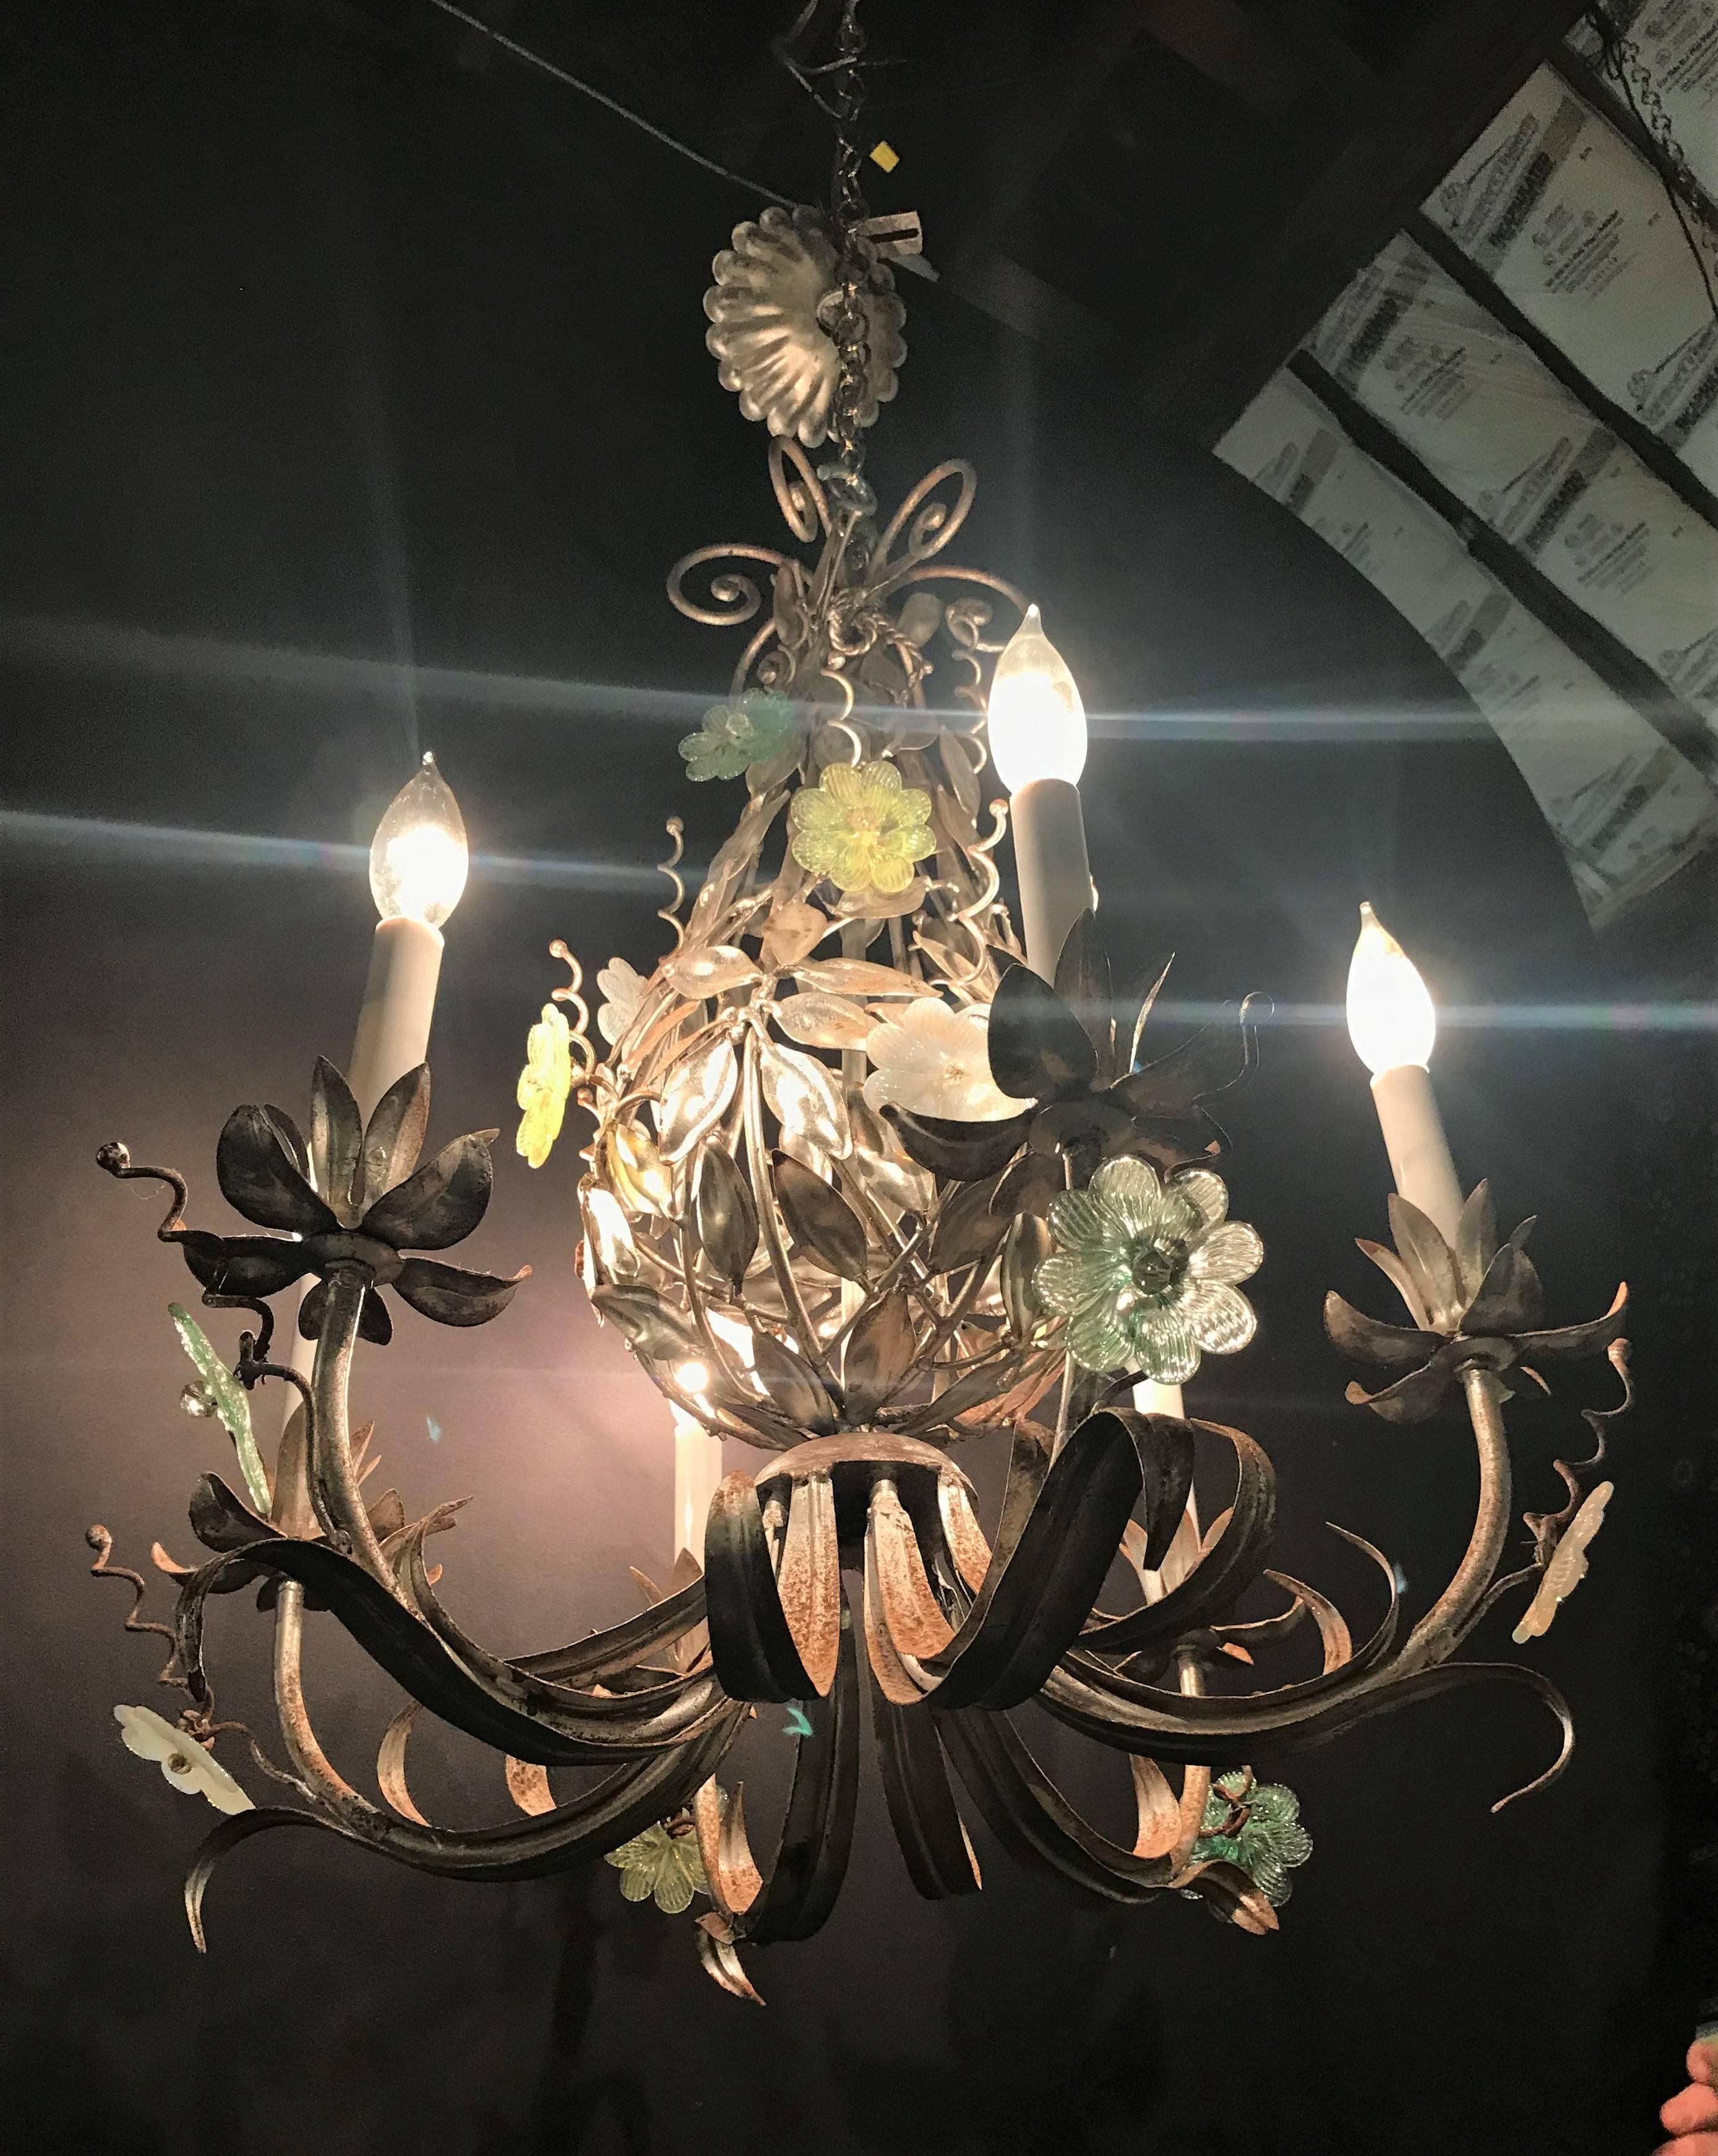 Pair of silver overlay metal chandeliers with glass Murano flowers each having six lights. This Hollywood Regency pair of chandeliers are sleek and stylish with their colored Murano floral additions. Having distressed metal frames with a matching